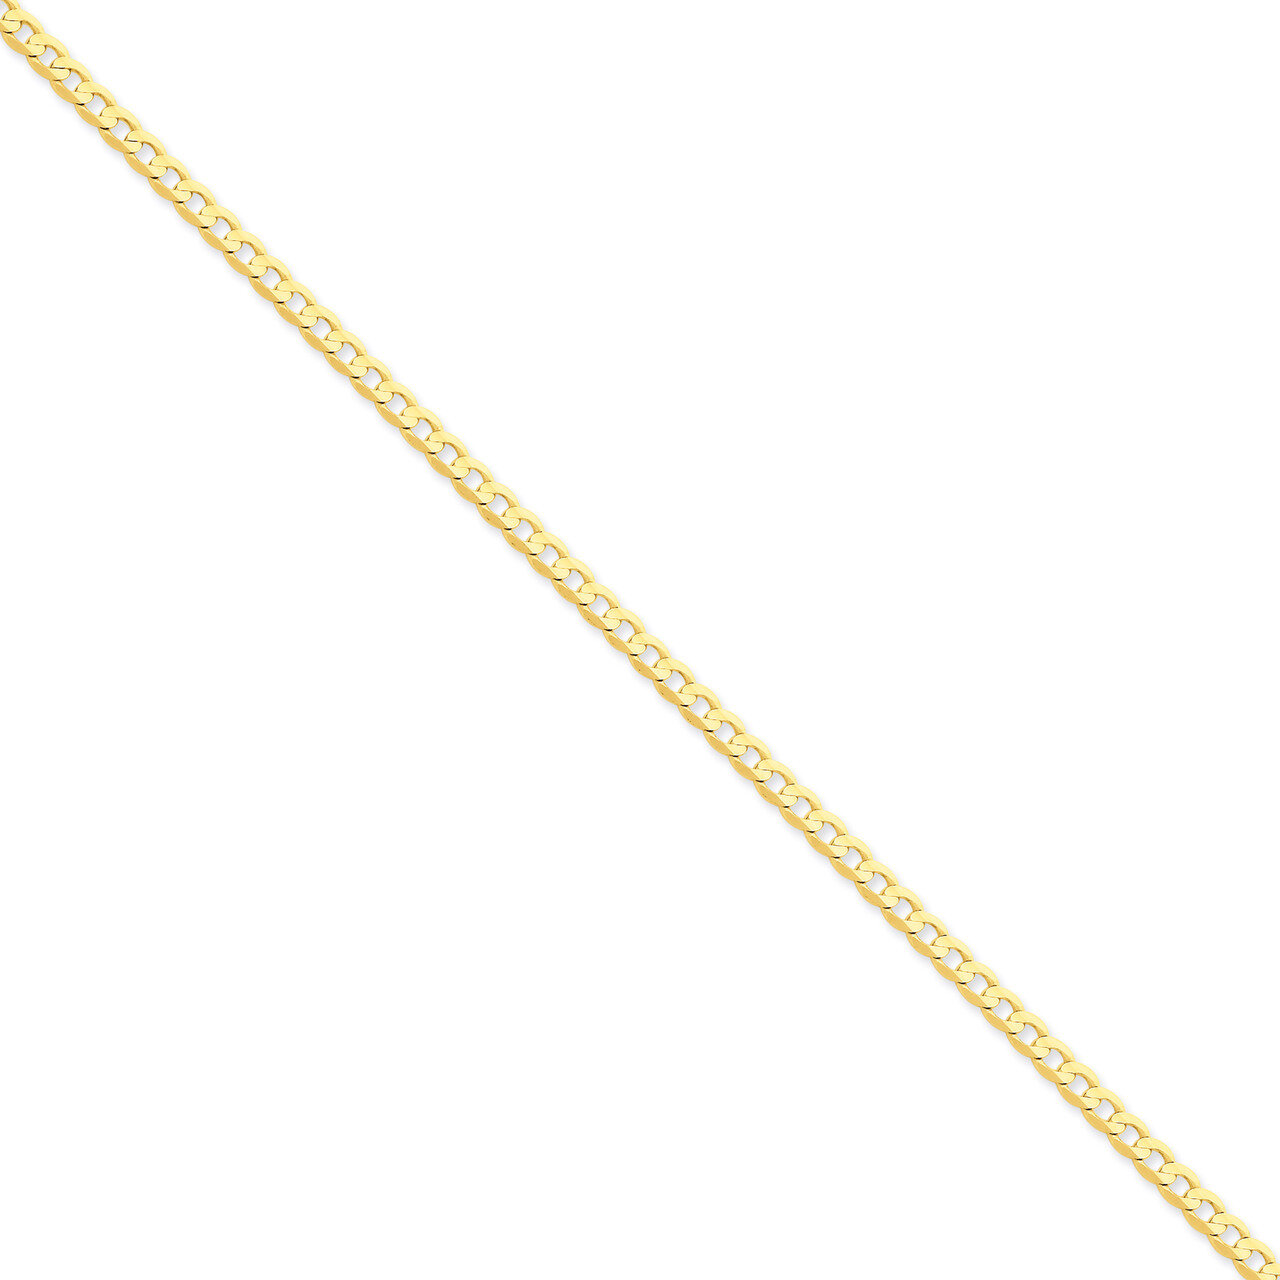 3.8mm Concave Curb Chain 18 Inch 14k Gold LCR100-18